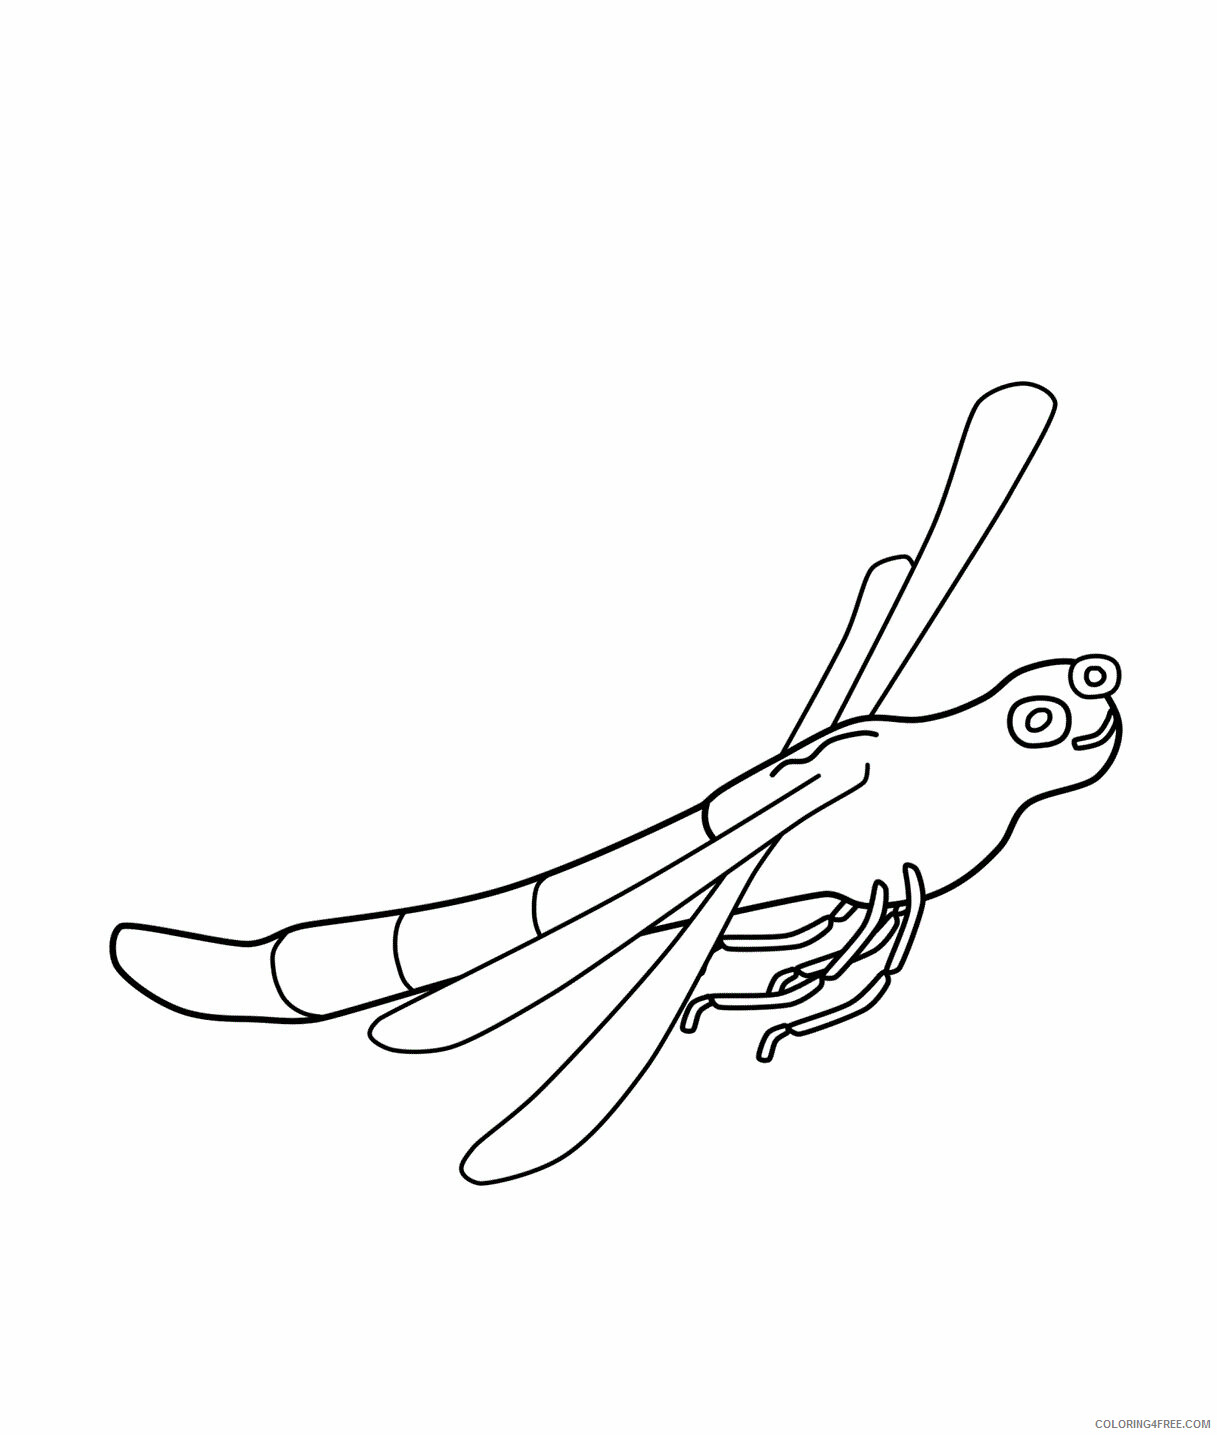 Dragonfly Coloring Pages Animal Printable Sheets Dragonfly To Print 2021 1781 Coloring4free